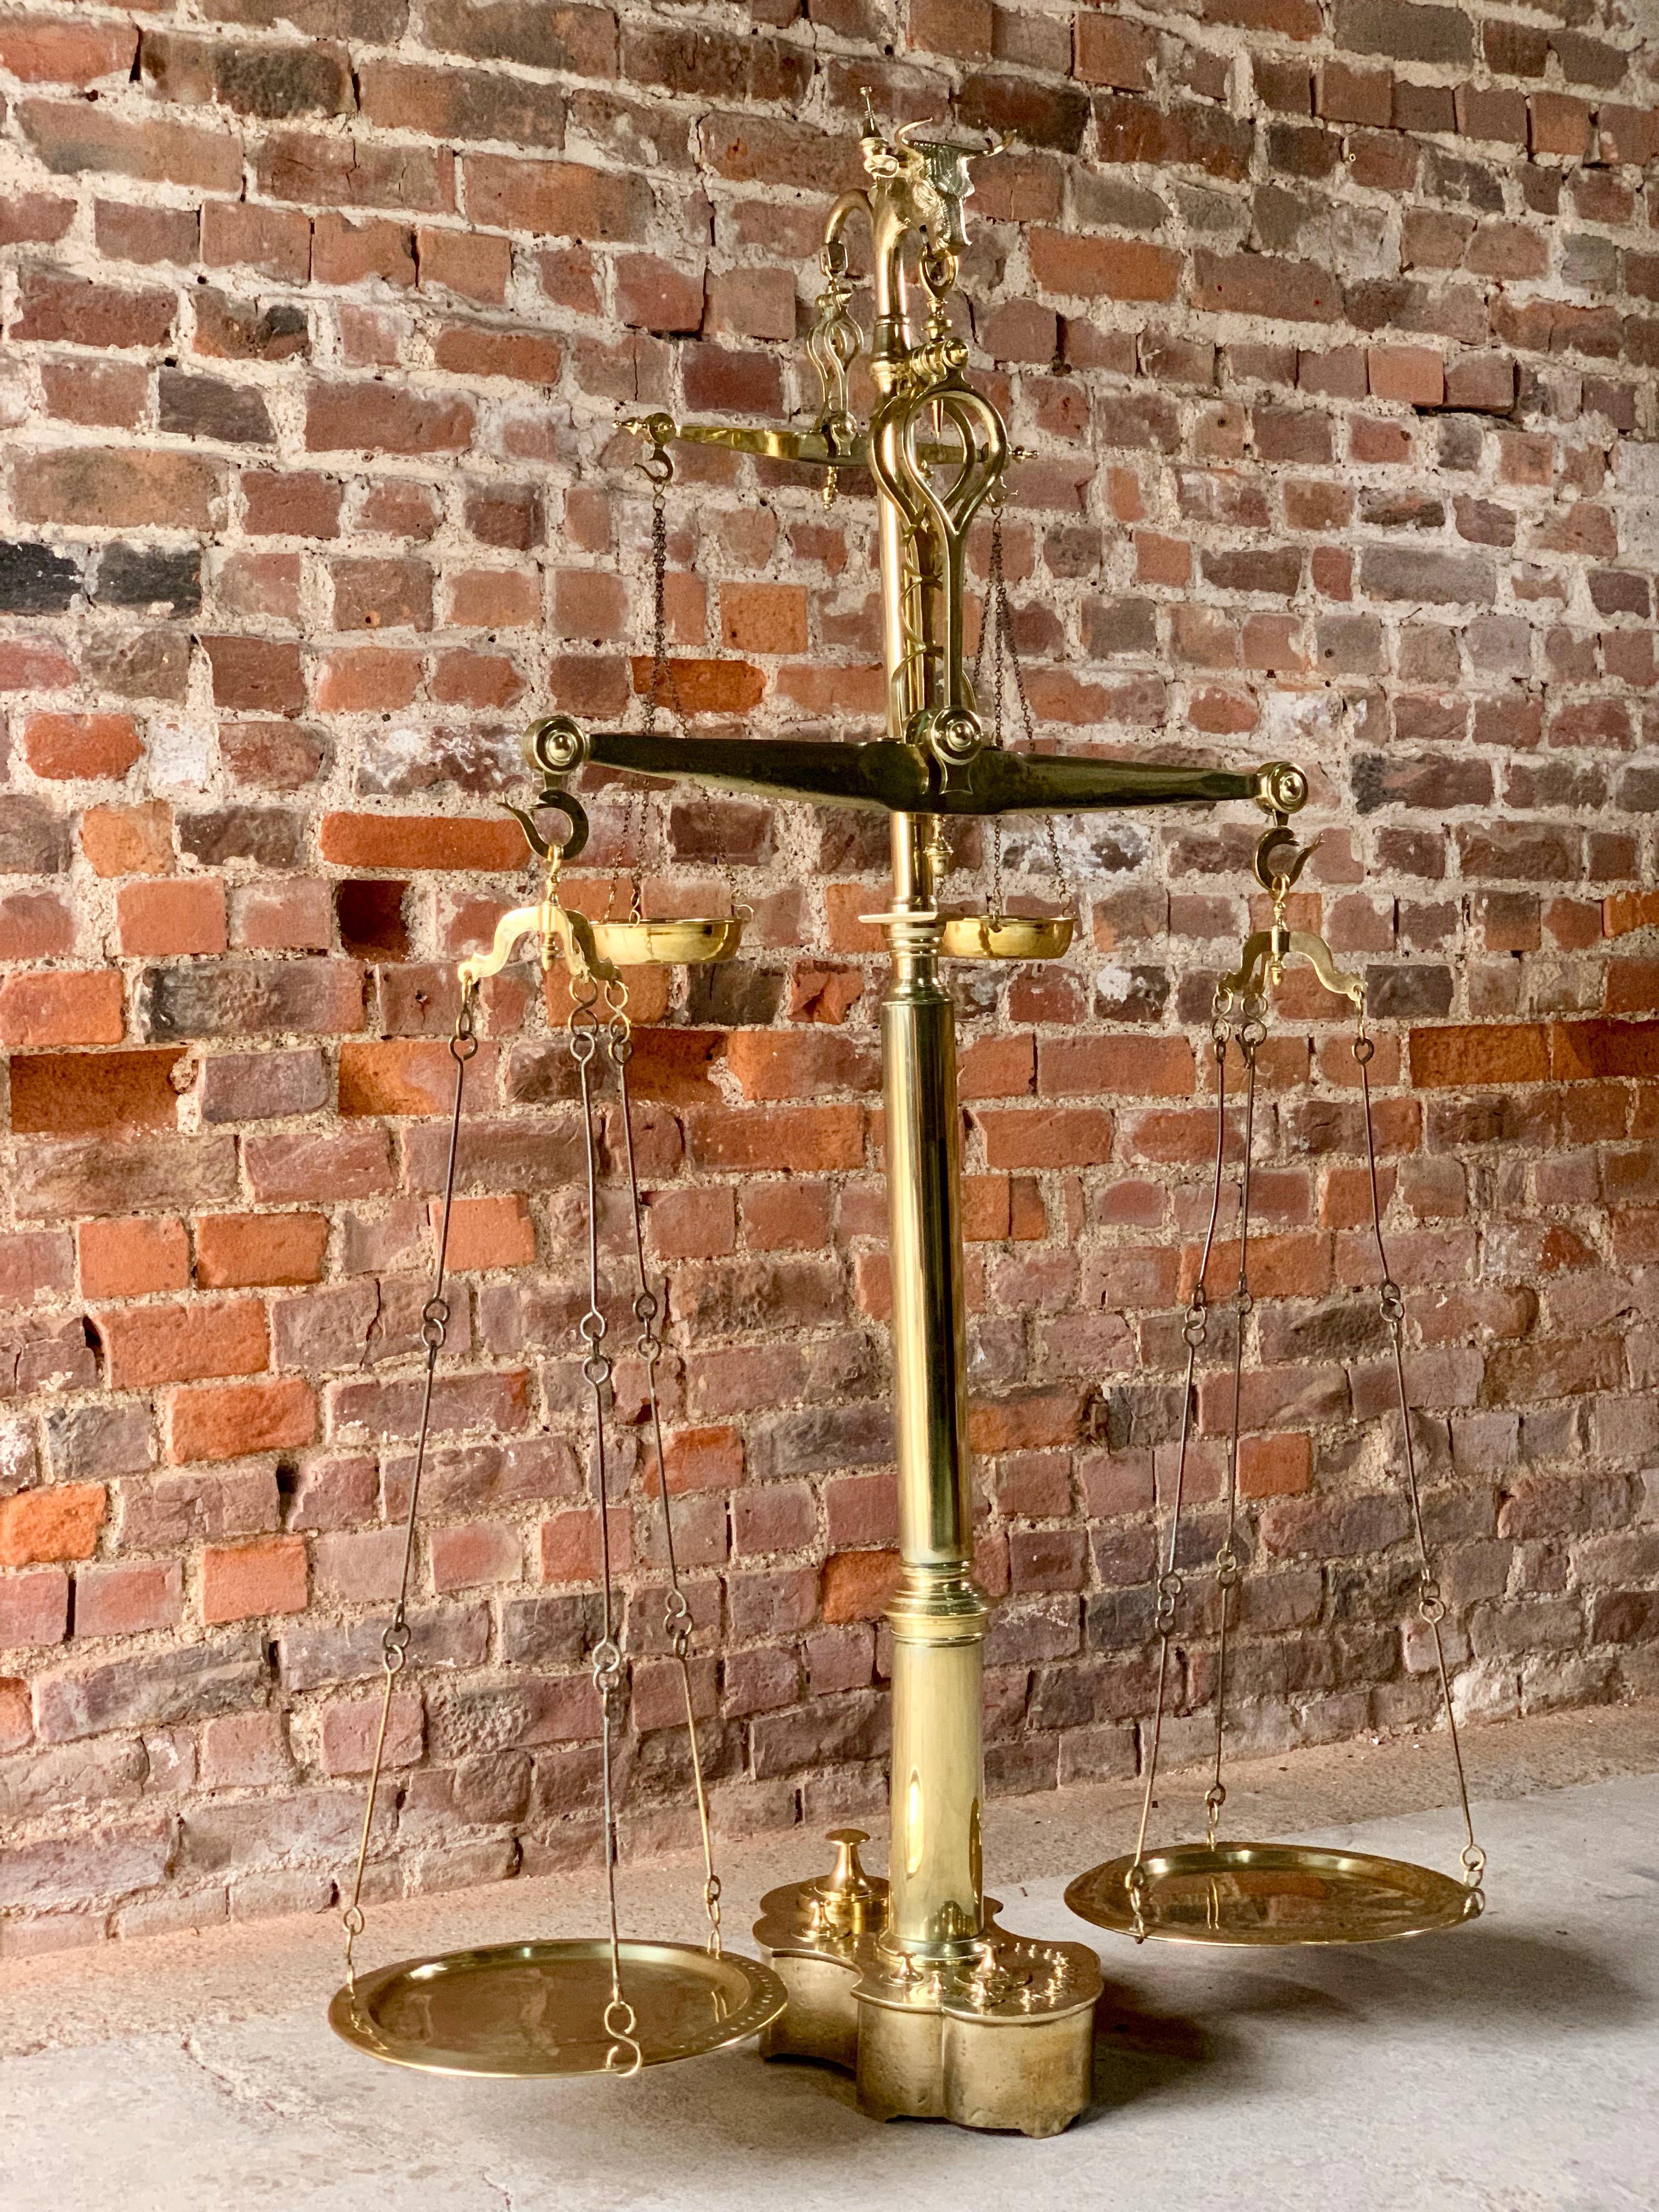 Magnificent antique brass butchers scales 19th century Portuguese, circa 1890

A magnificent set of 19th century Portuguese solid brass butcher's scales circa 1890, this monumental et of scales comes complete with its original set of 14 graduating